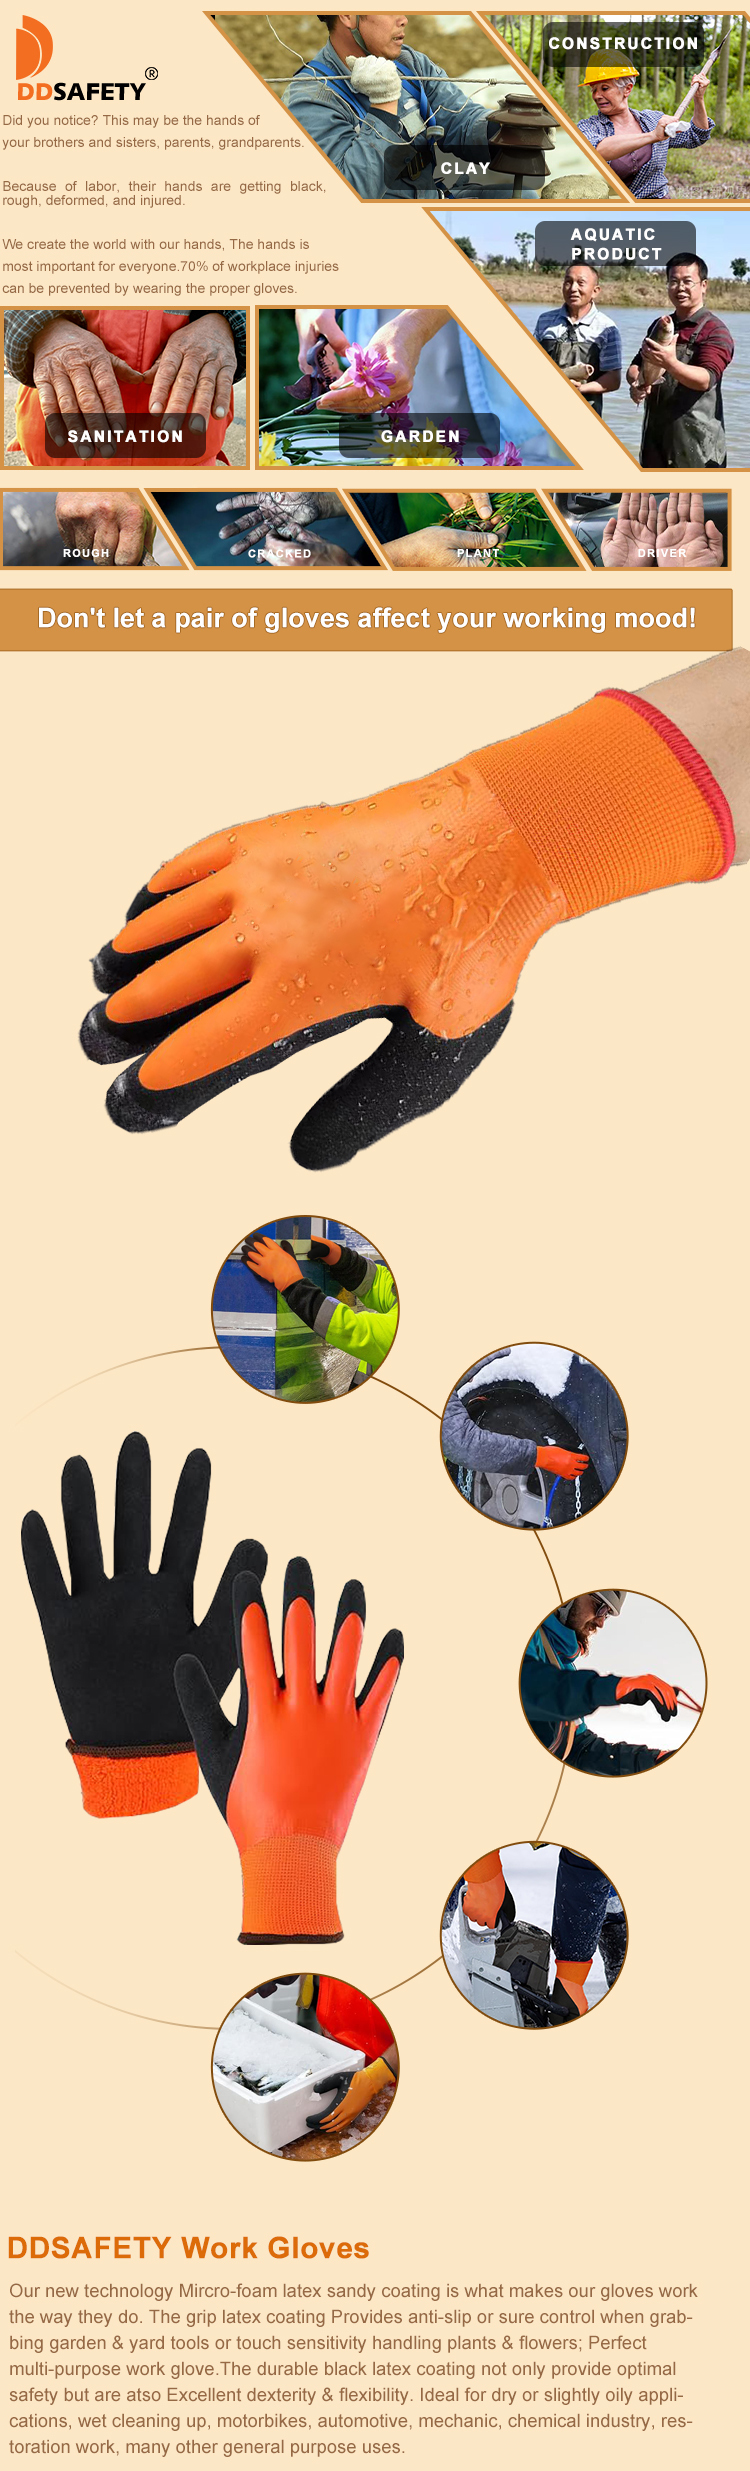 Waterproof Winter Work Gloves for Men and Women,Insulated Work Gloves Cold Weather,Warm Freezer Gloves- DNL521 Waterproof Winter Work Gloves for Men and Women,Insulated Work Gloves Cold Weather,Warm Freezer Gloves- DNL521 Waterproof Work Gloves,waterproof gloves,Freezer Gloves